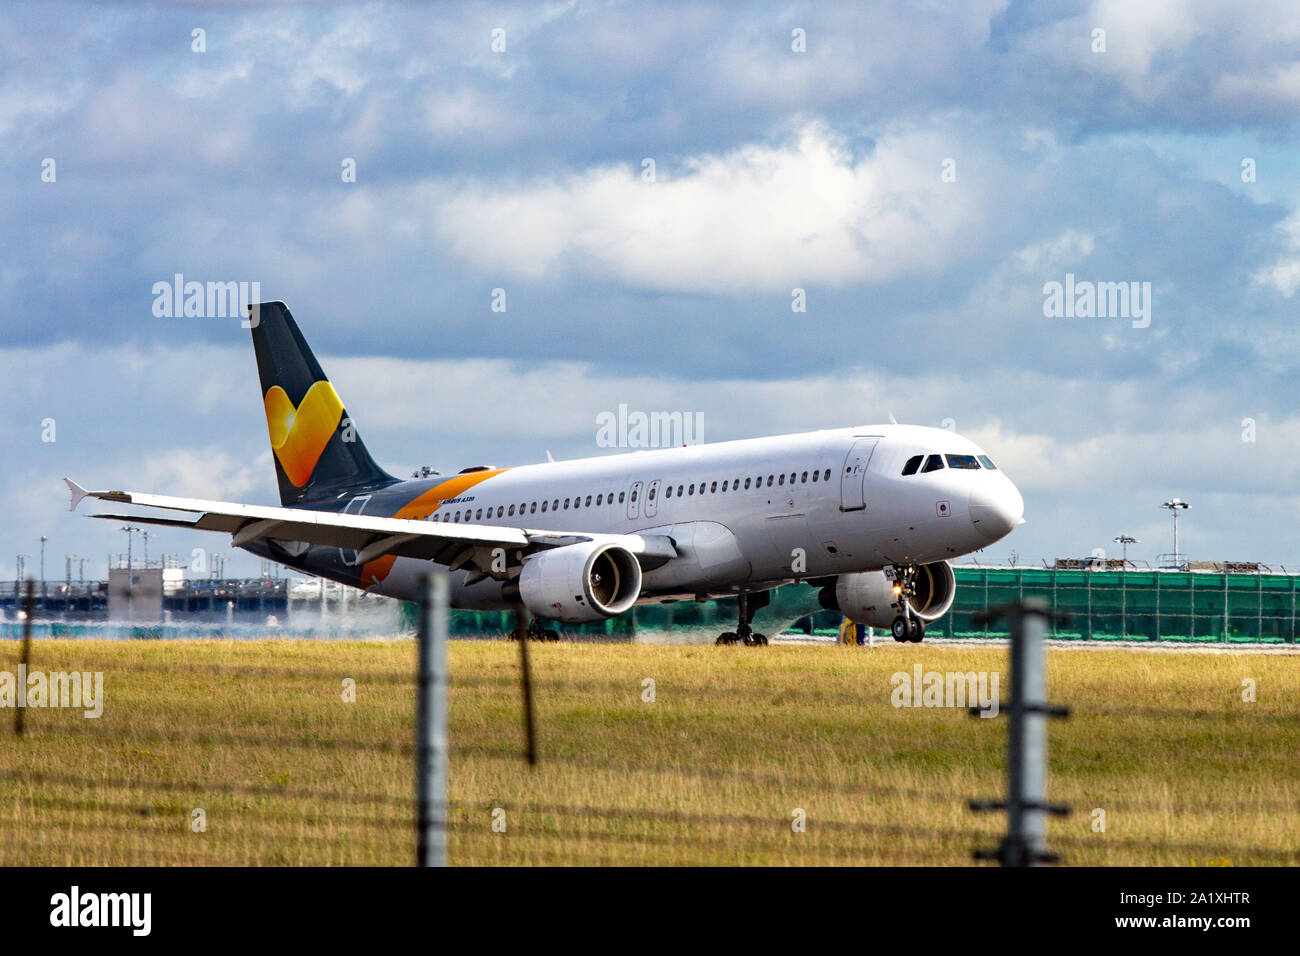 Picture dated September 28th shows a Thomas Cook repatriation flight landing at Stansted Airport,Essex,from Majorca in Spain on Saturday afternoon.The Airbus plane still has the company markings on its tail but the Thomas Cook logo on the front has been removed.  More than half of the 150,000 holidaymakers left stranded abroad after the collapse of travel firm Thomas Cook have been repatriated to Britain, the Civil Aviation Authority regulator said Saturday.  The CAA said 76,000 people had been returned in the first five days of Operation Matterhorn C Britain's biggest peacetime repatriation. Stock Photo